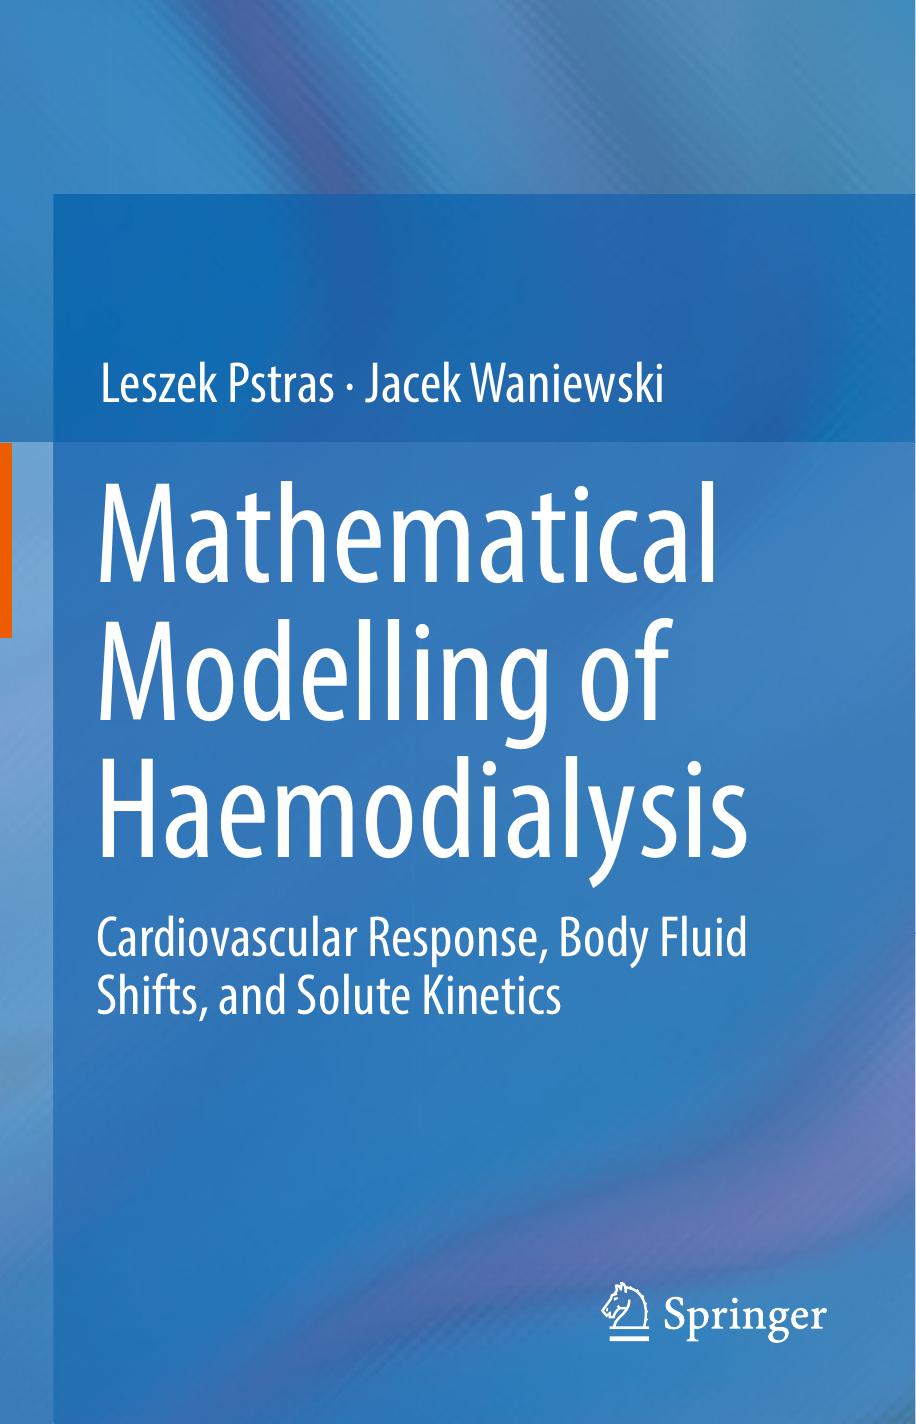 Mathematical Modelling of Haemodialysis Cardiovascular Response, Body Fluid Shifts, and Solute Kinetics 2019